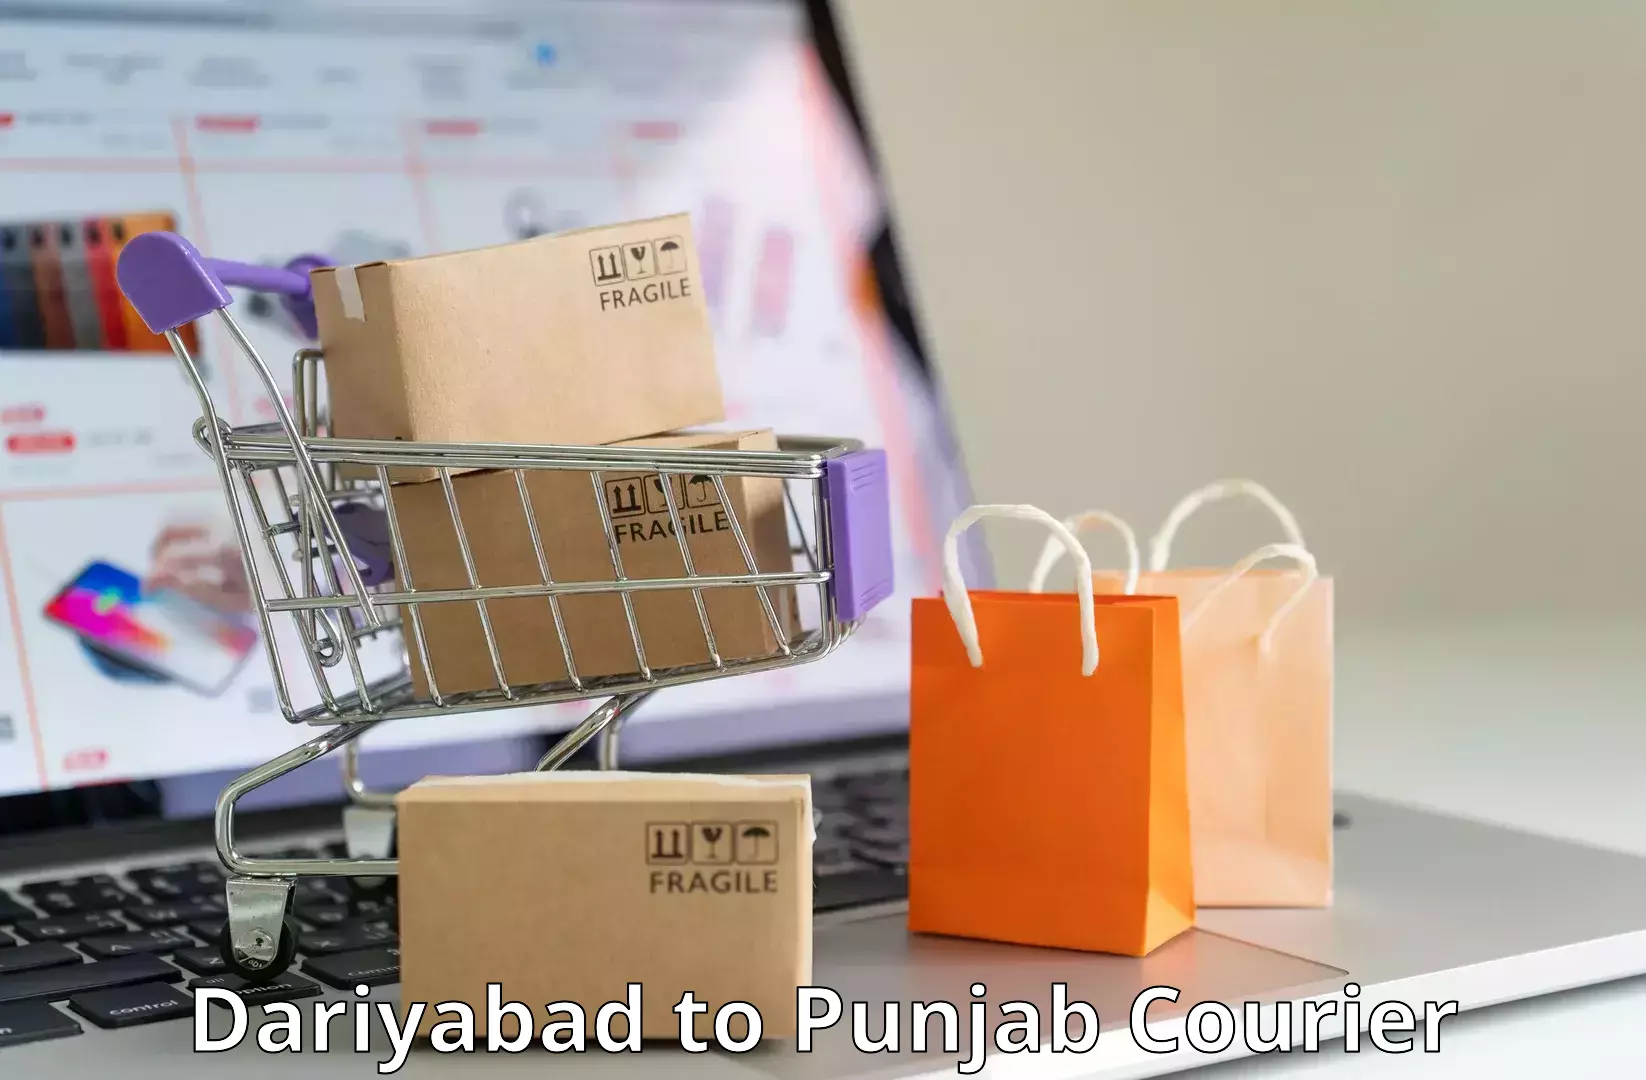 Optimized delivery routes in Dariyabad to Faridkot